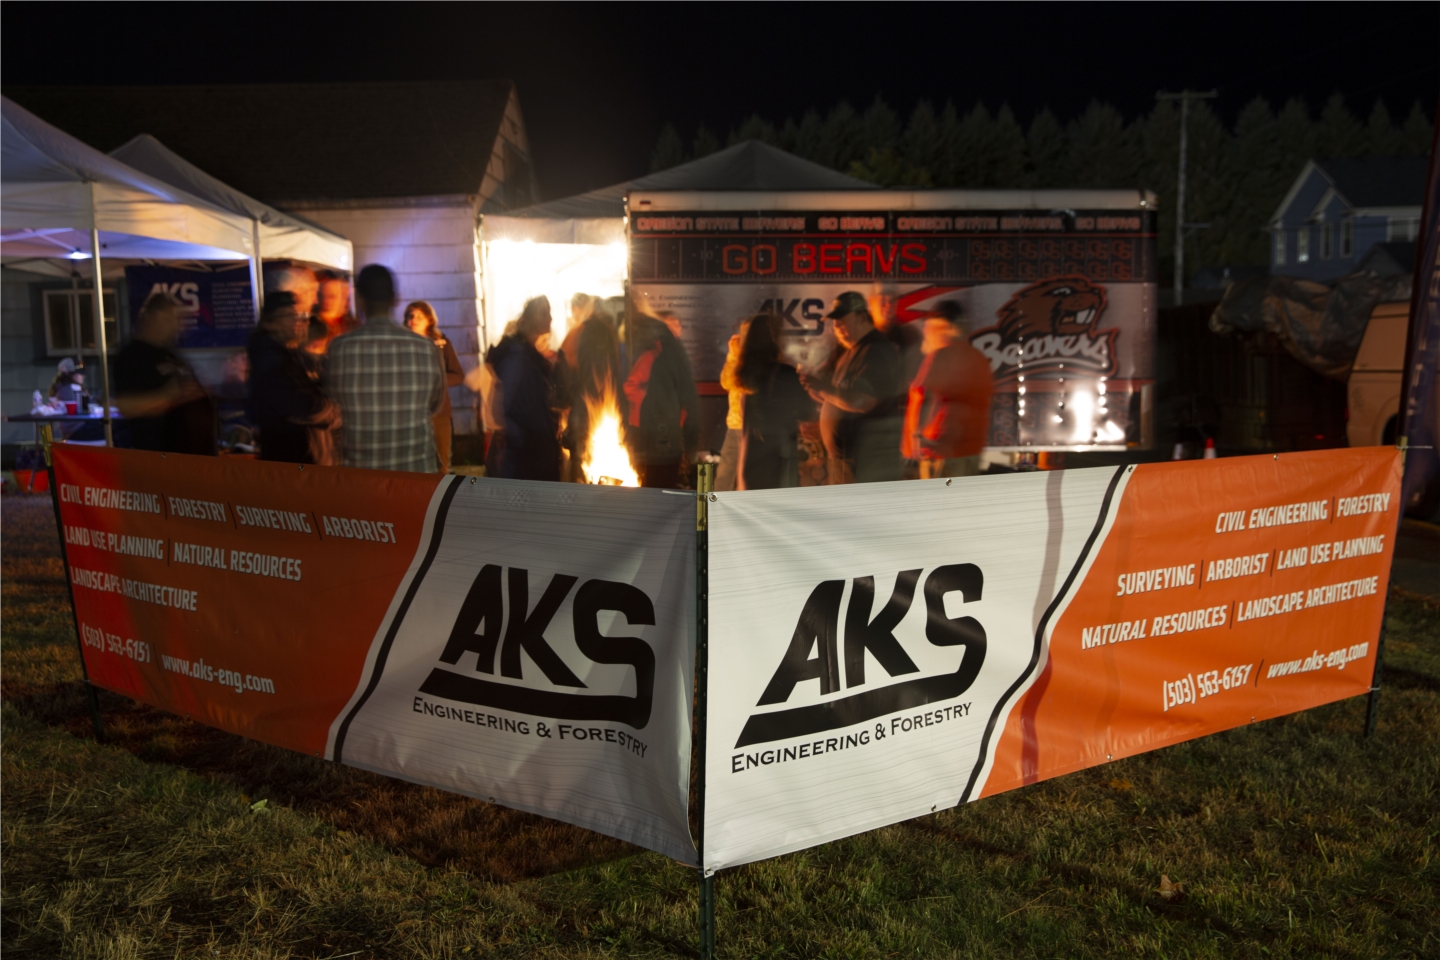 AKS holds several large client events each year, in addition to the employee only events. Creating strong bonds between clients and employees is an important part of the company's success.